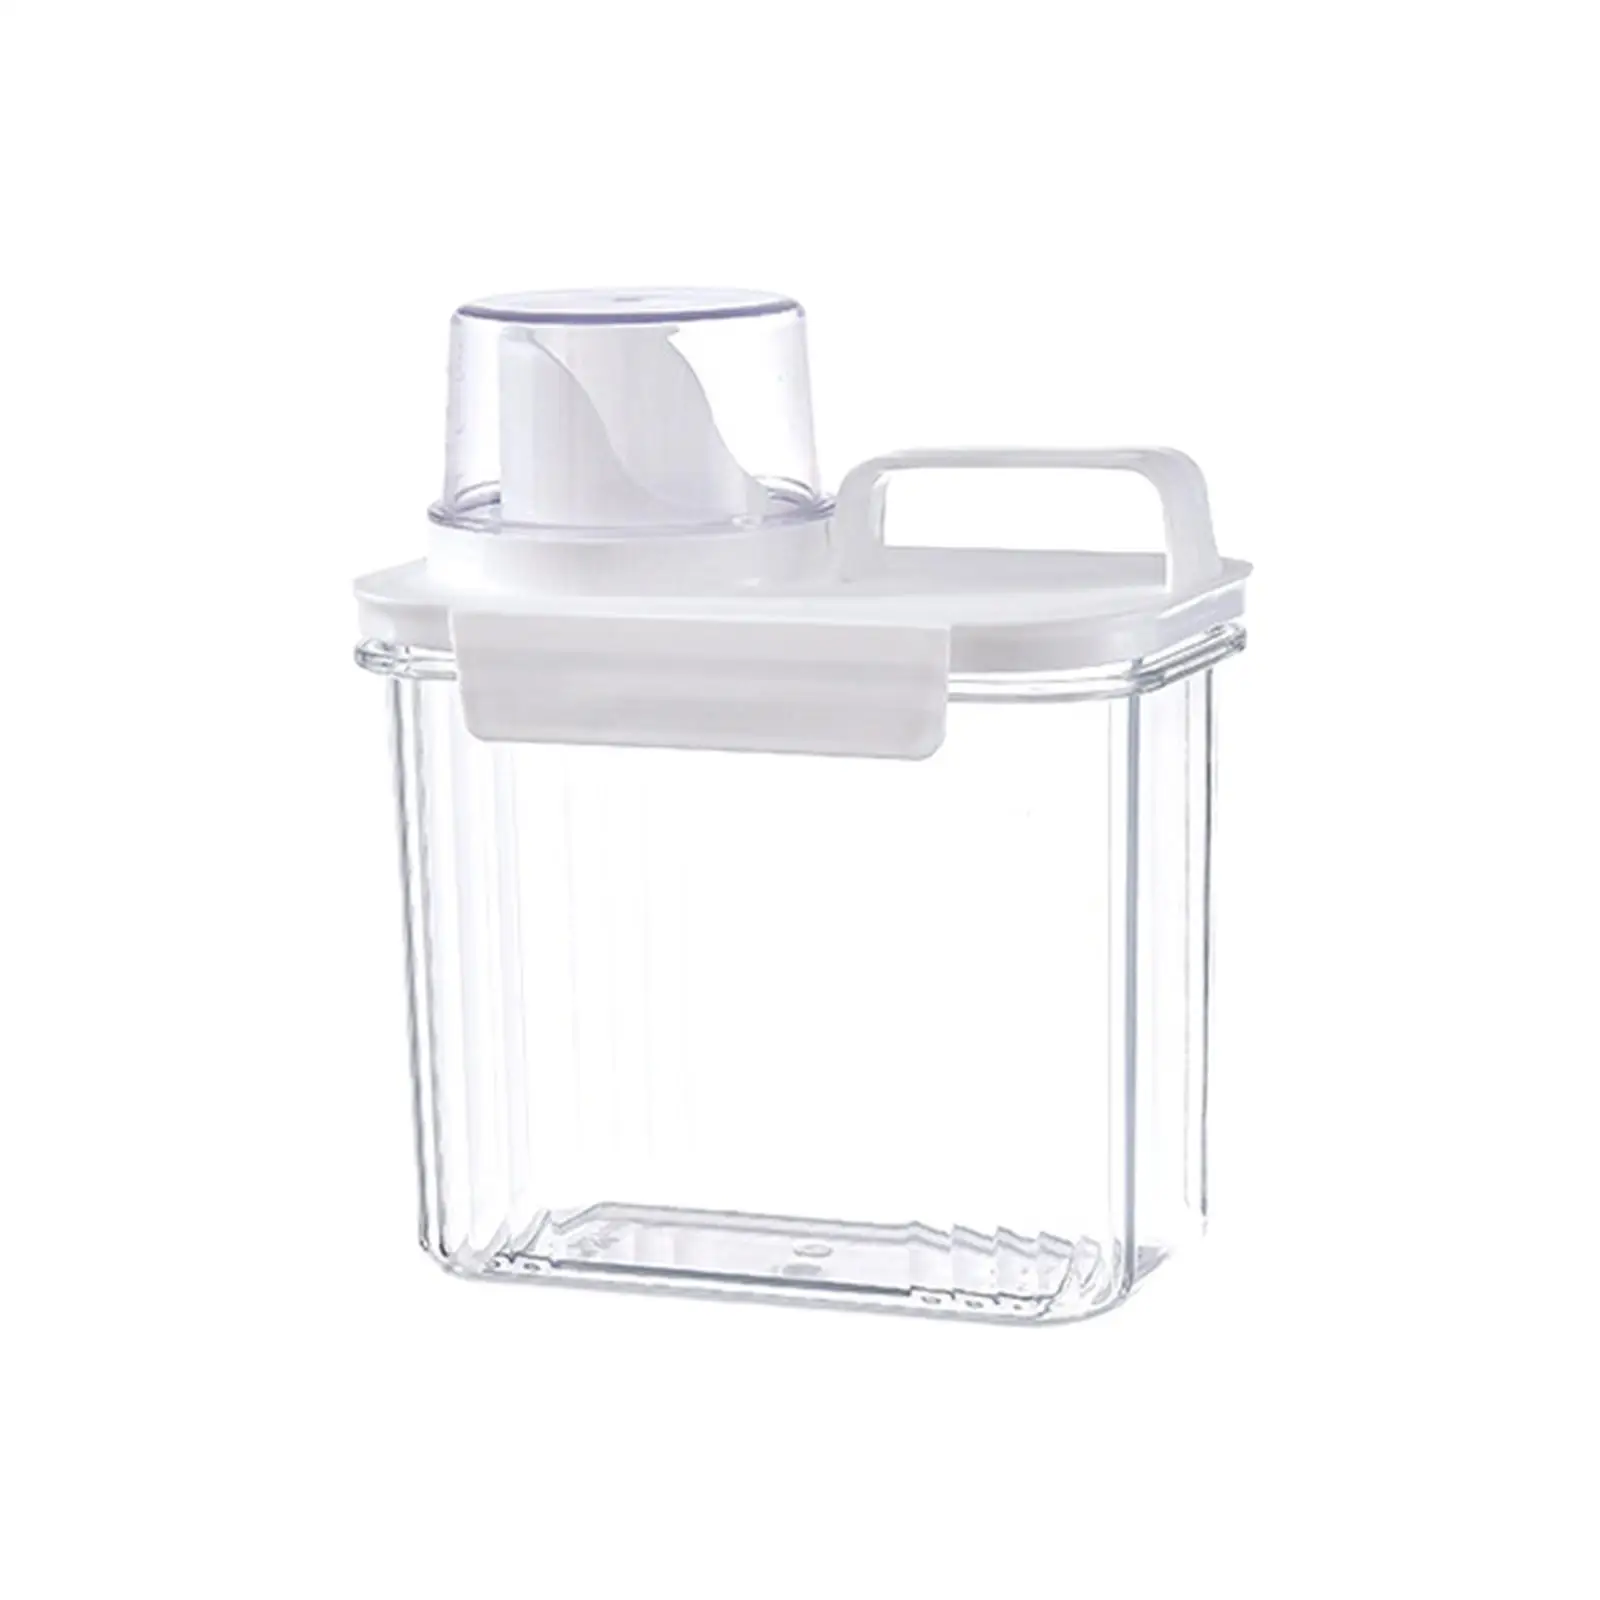 Laundry Powder Containers Multipurpose Clear Reusable Liquid Laundry Soap Dispenser for Kitchen Countertop Laundry Room Bathroom